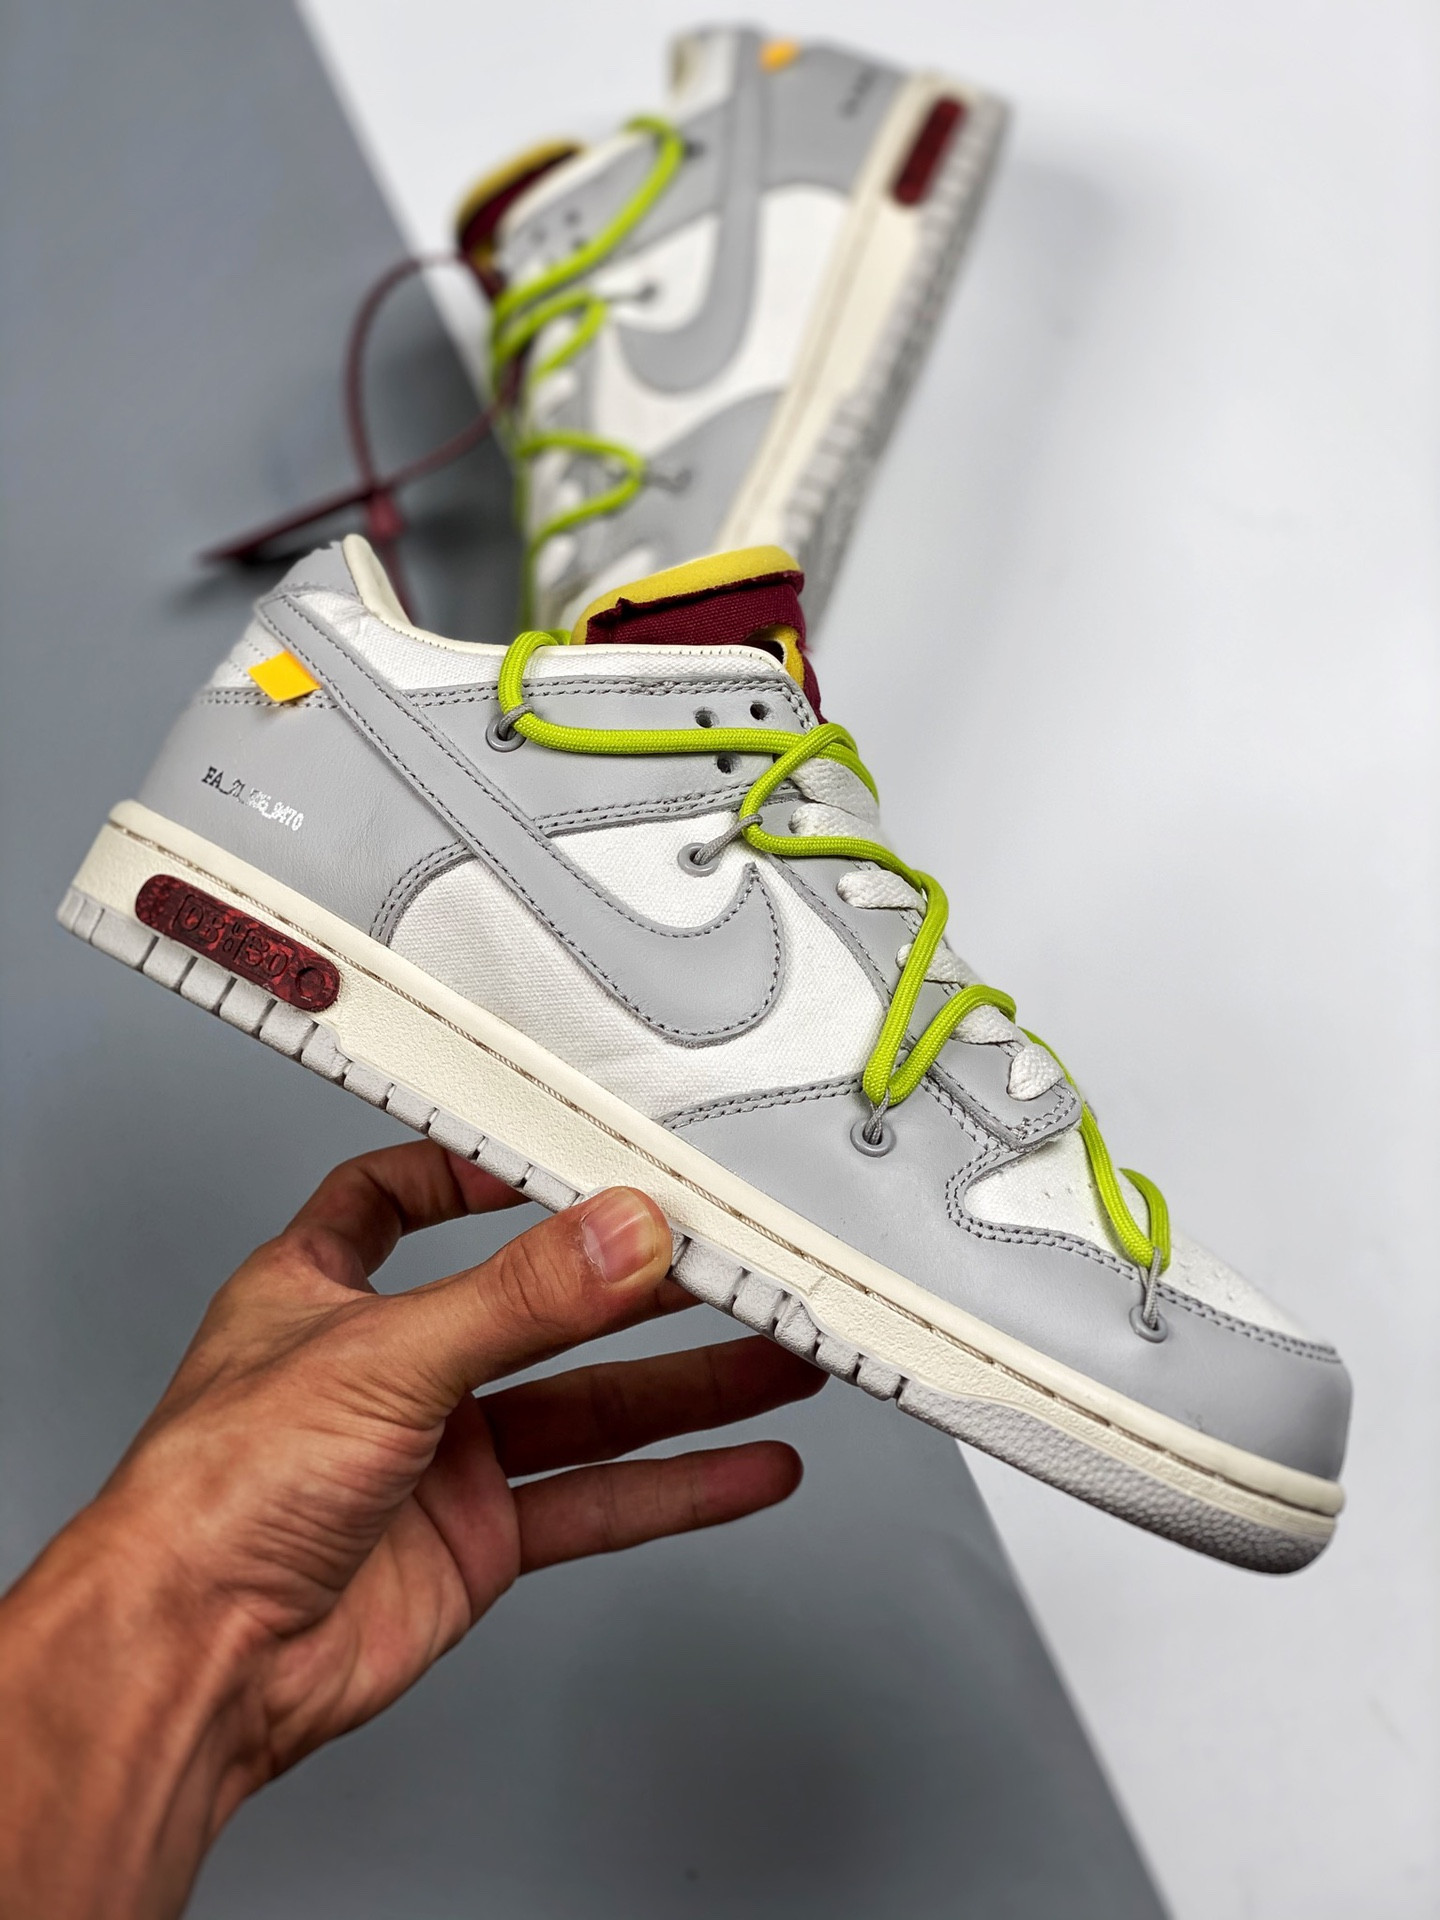 Off-White x Nike Dunk Low 08 of 50 Sail Grey For Sale